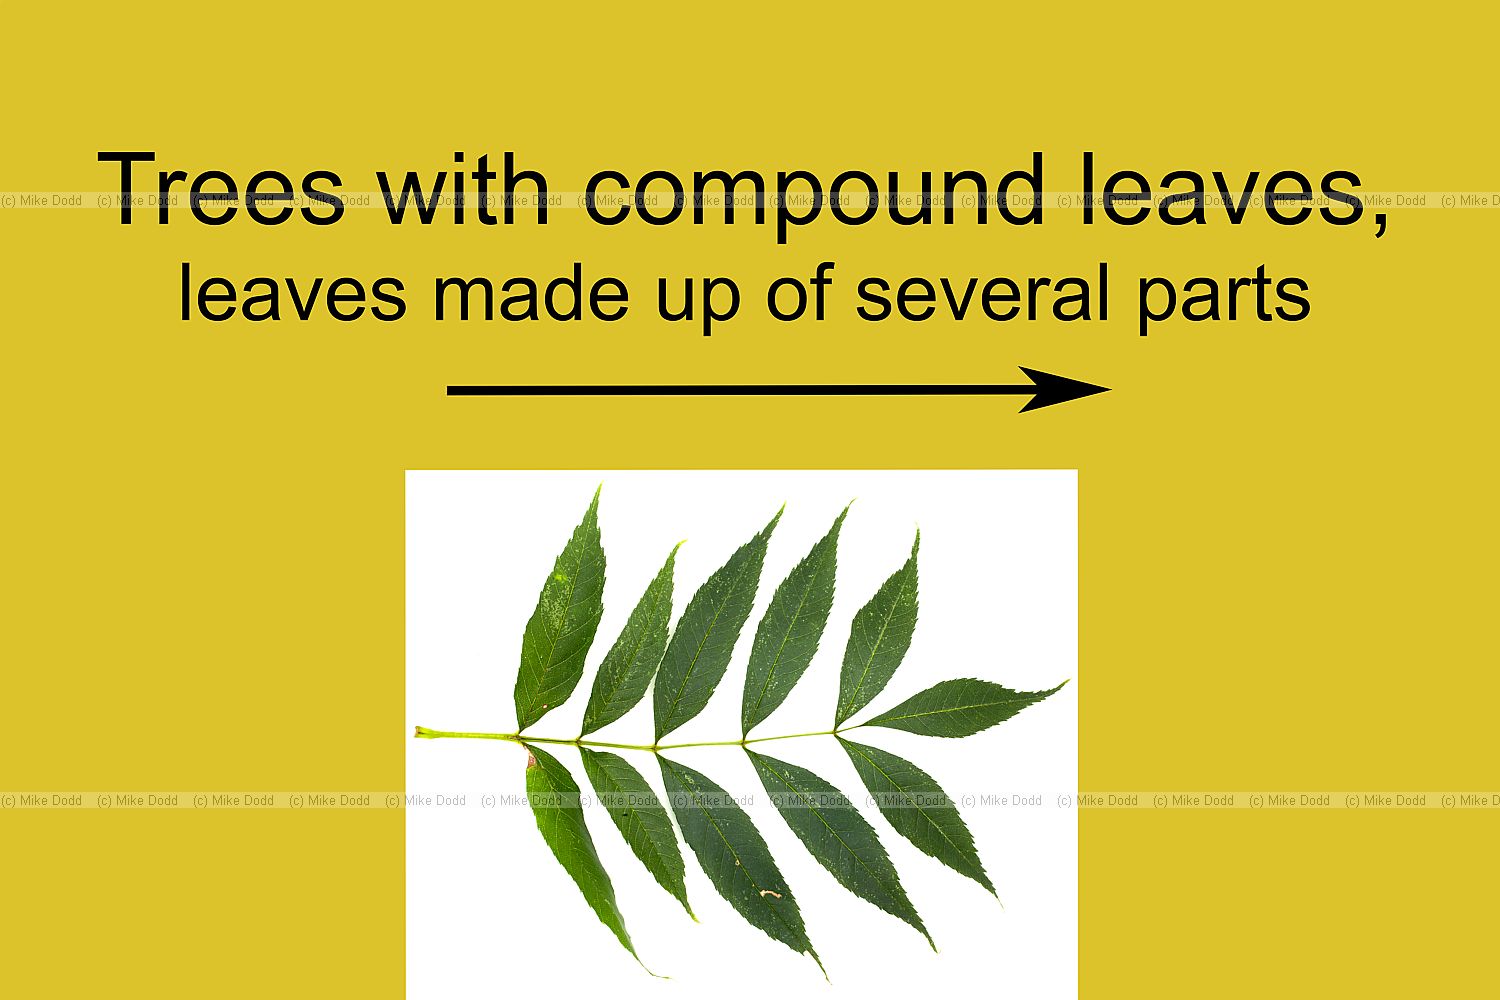 Trees with compound leaves